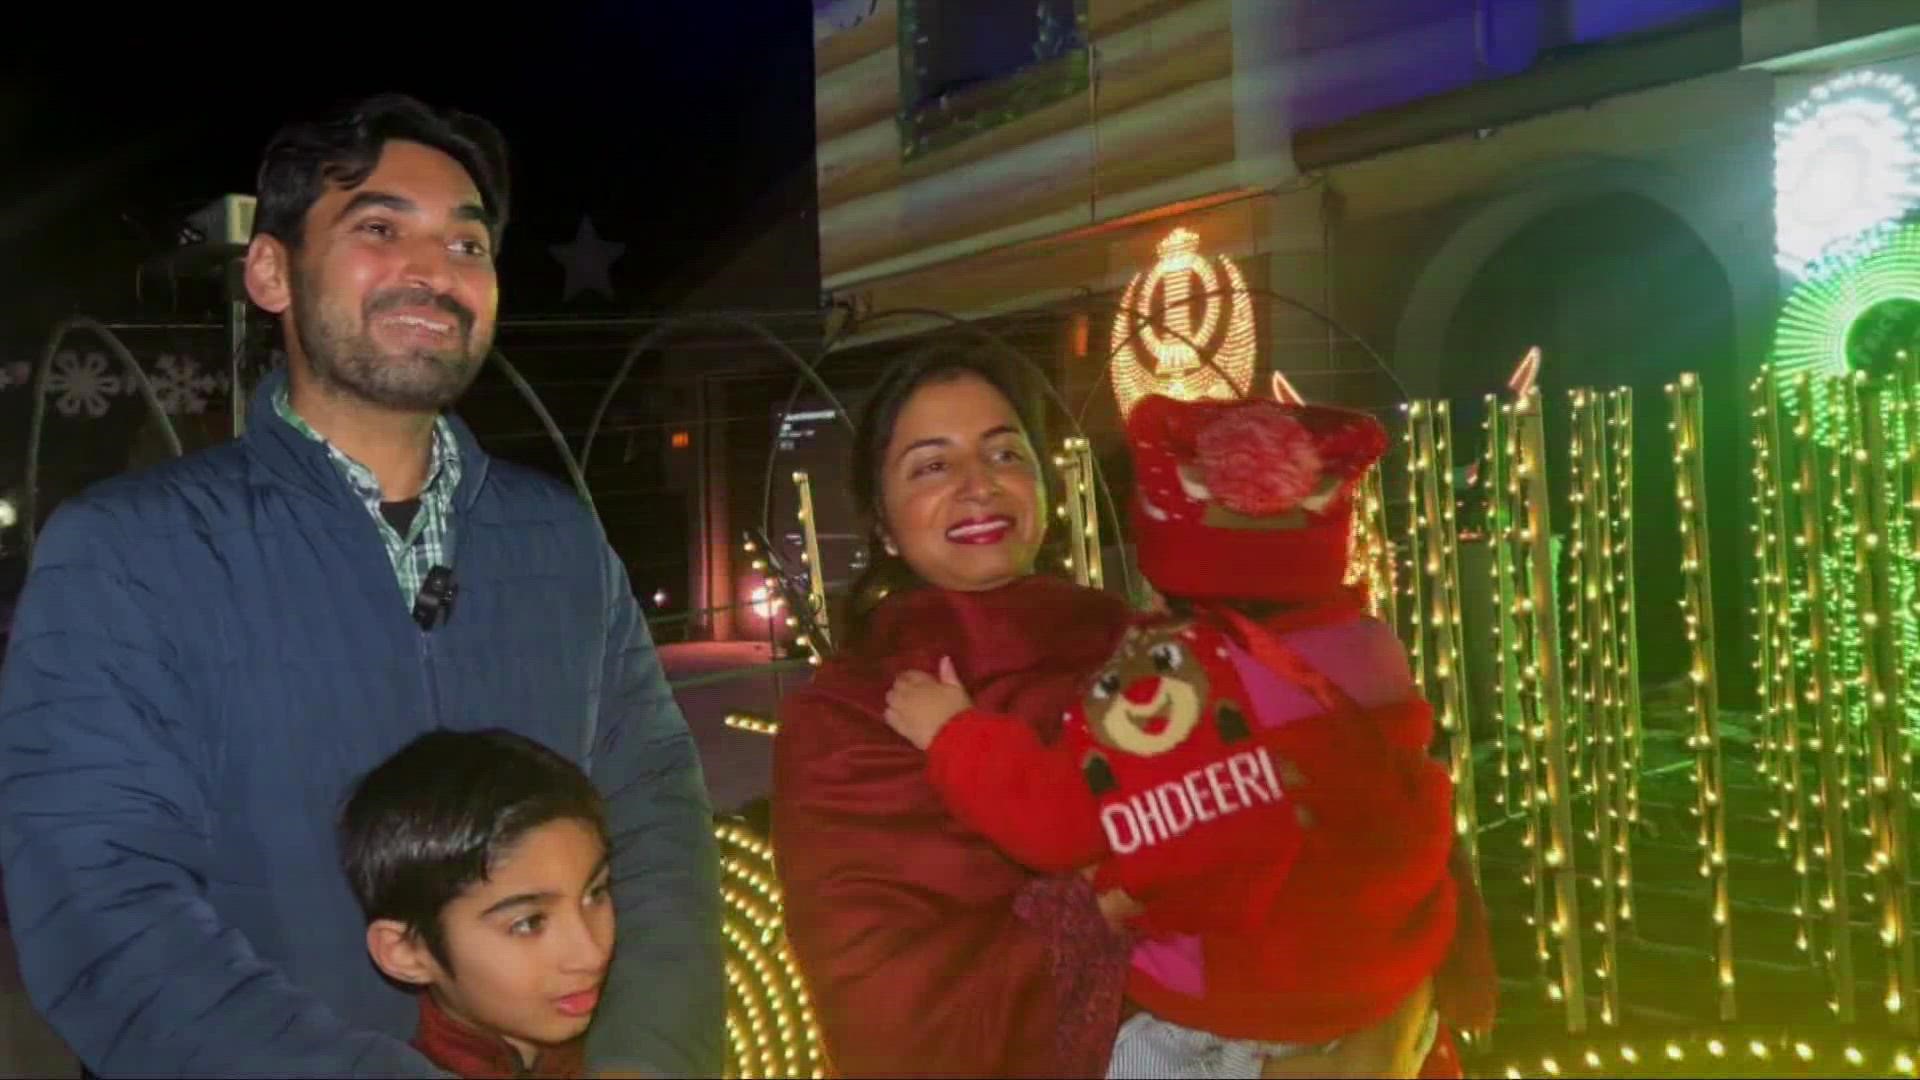 A family in Manteca was on The Great Christmas Light Fight showcasing their holiday decorations.